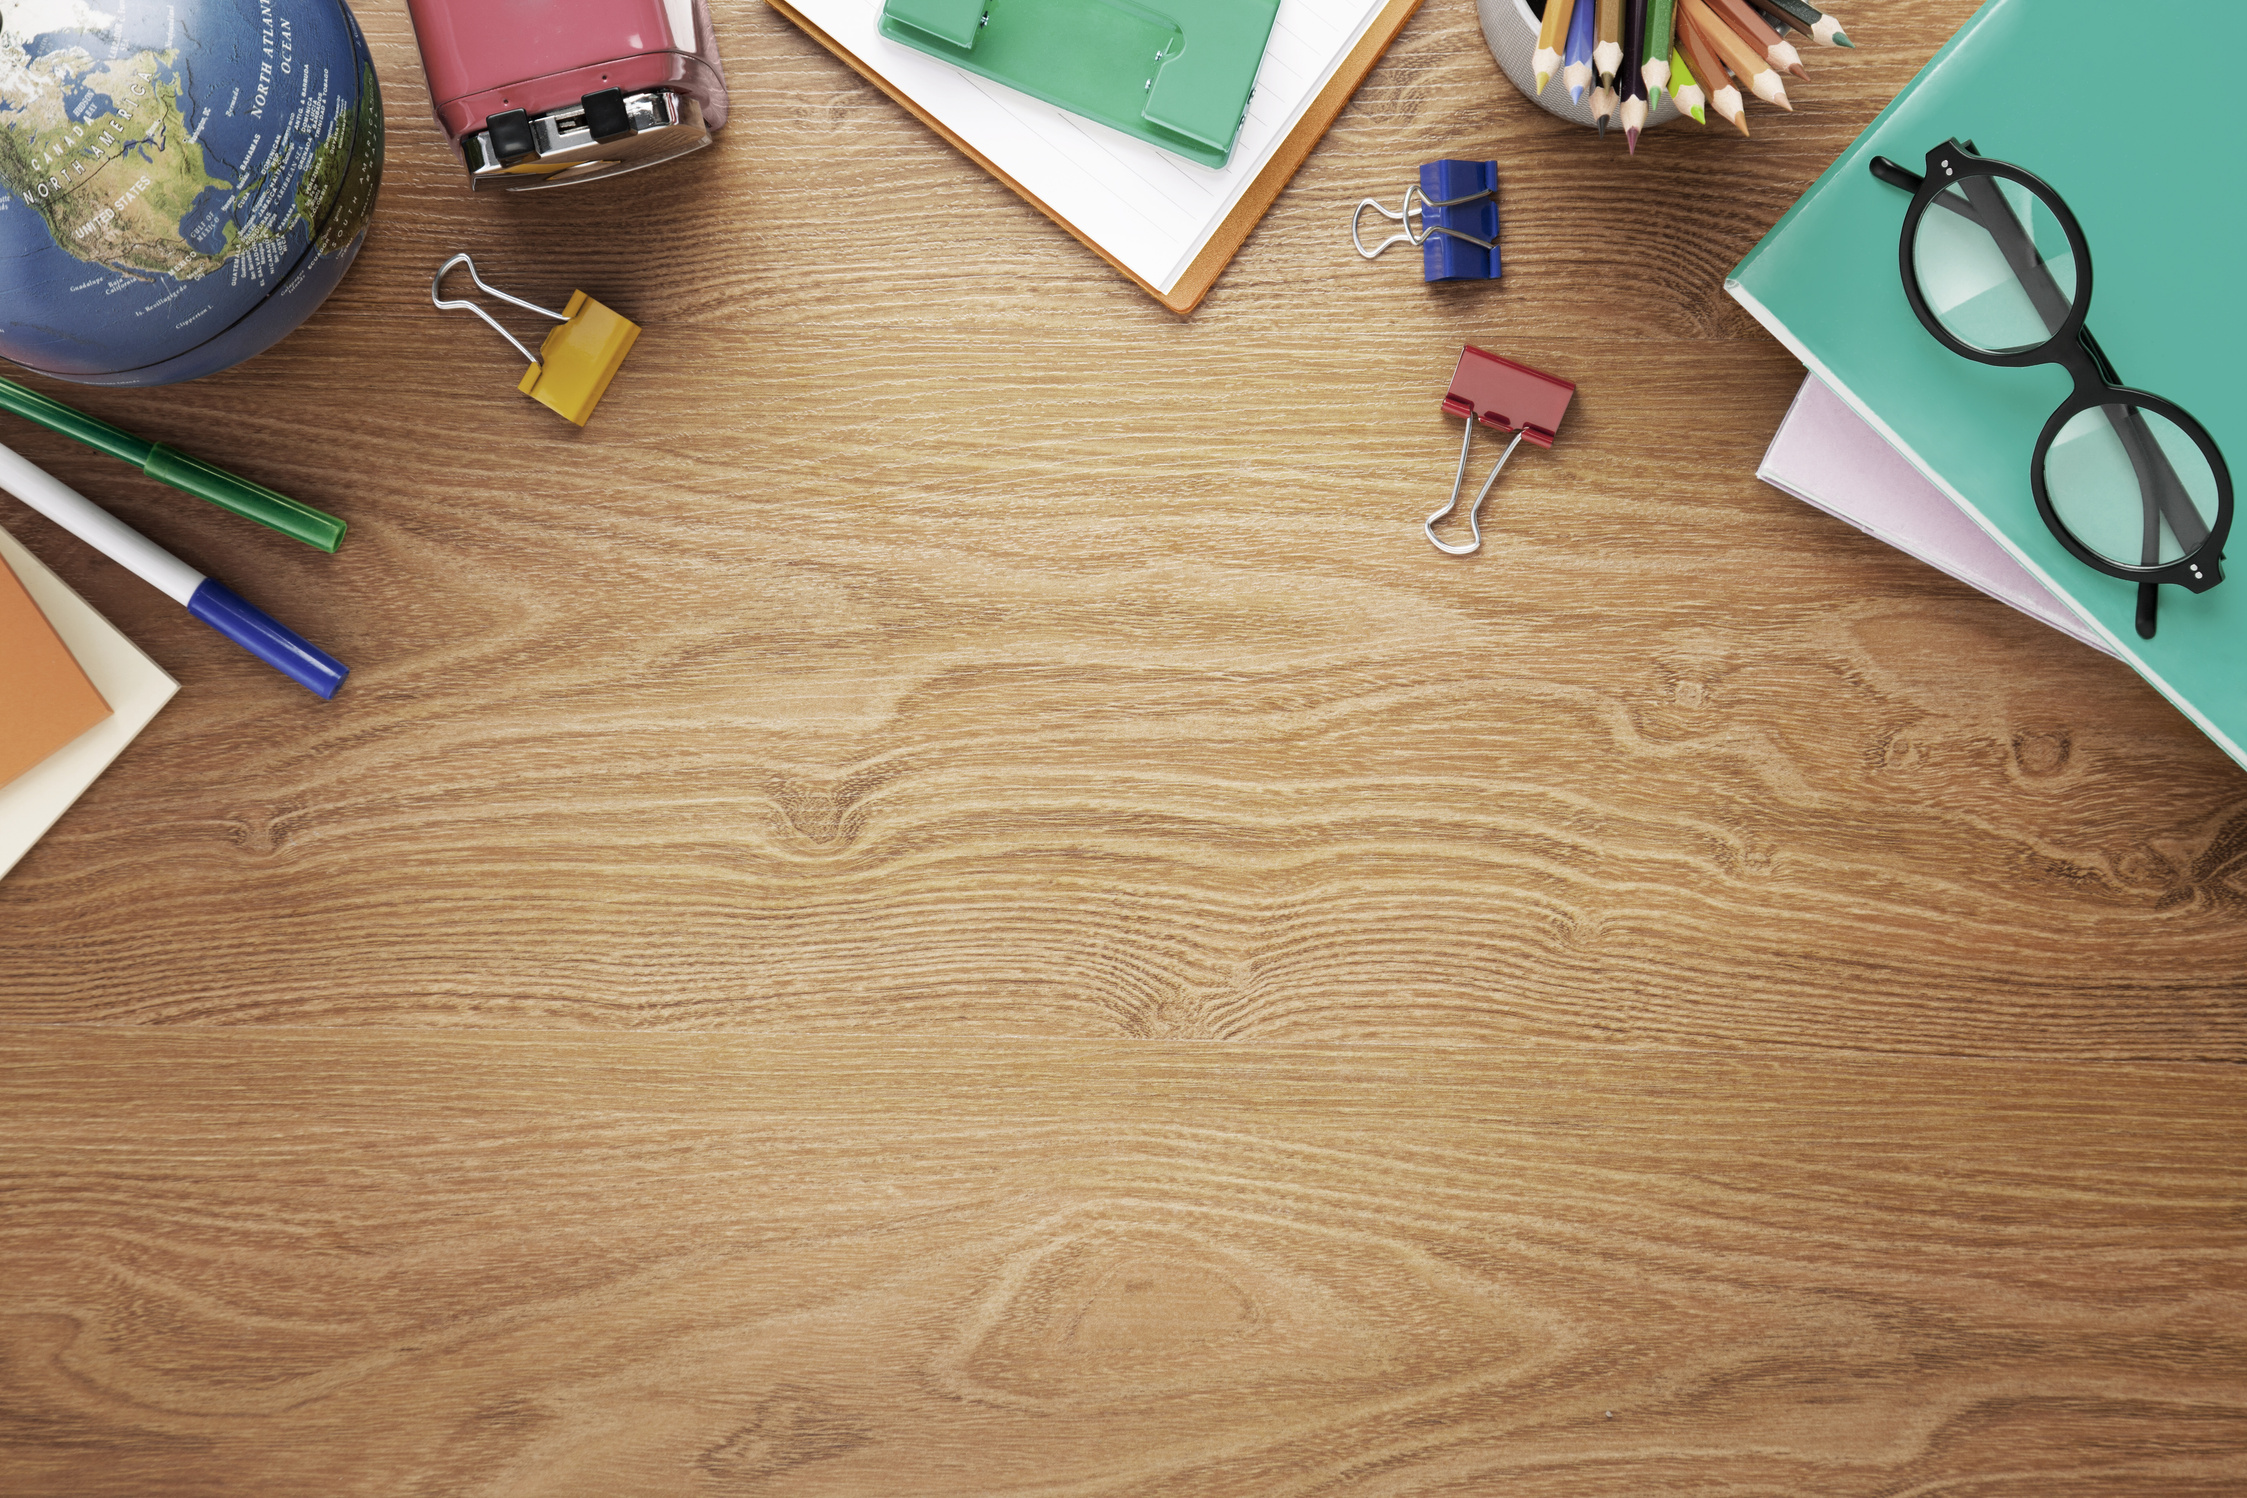 School supplies on desk background with copy space